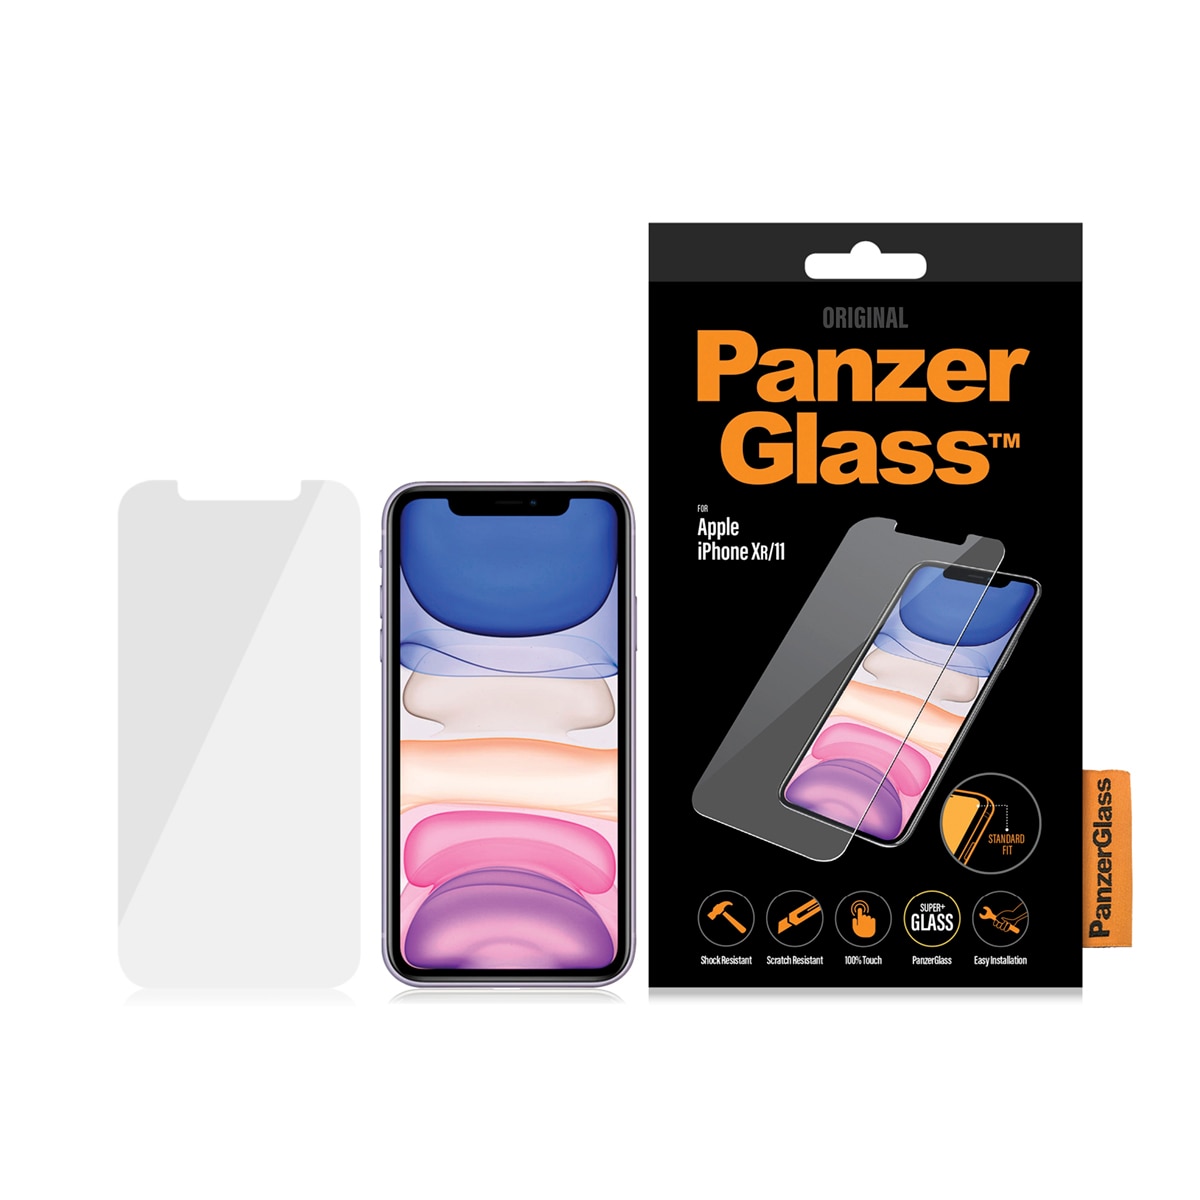 iPhone XR/11 Screen Protector